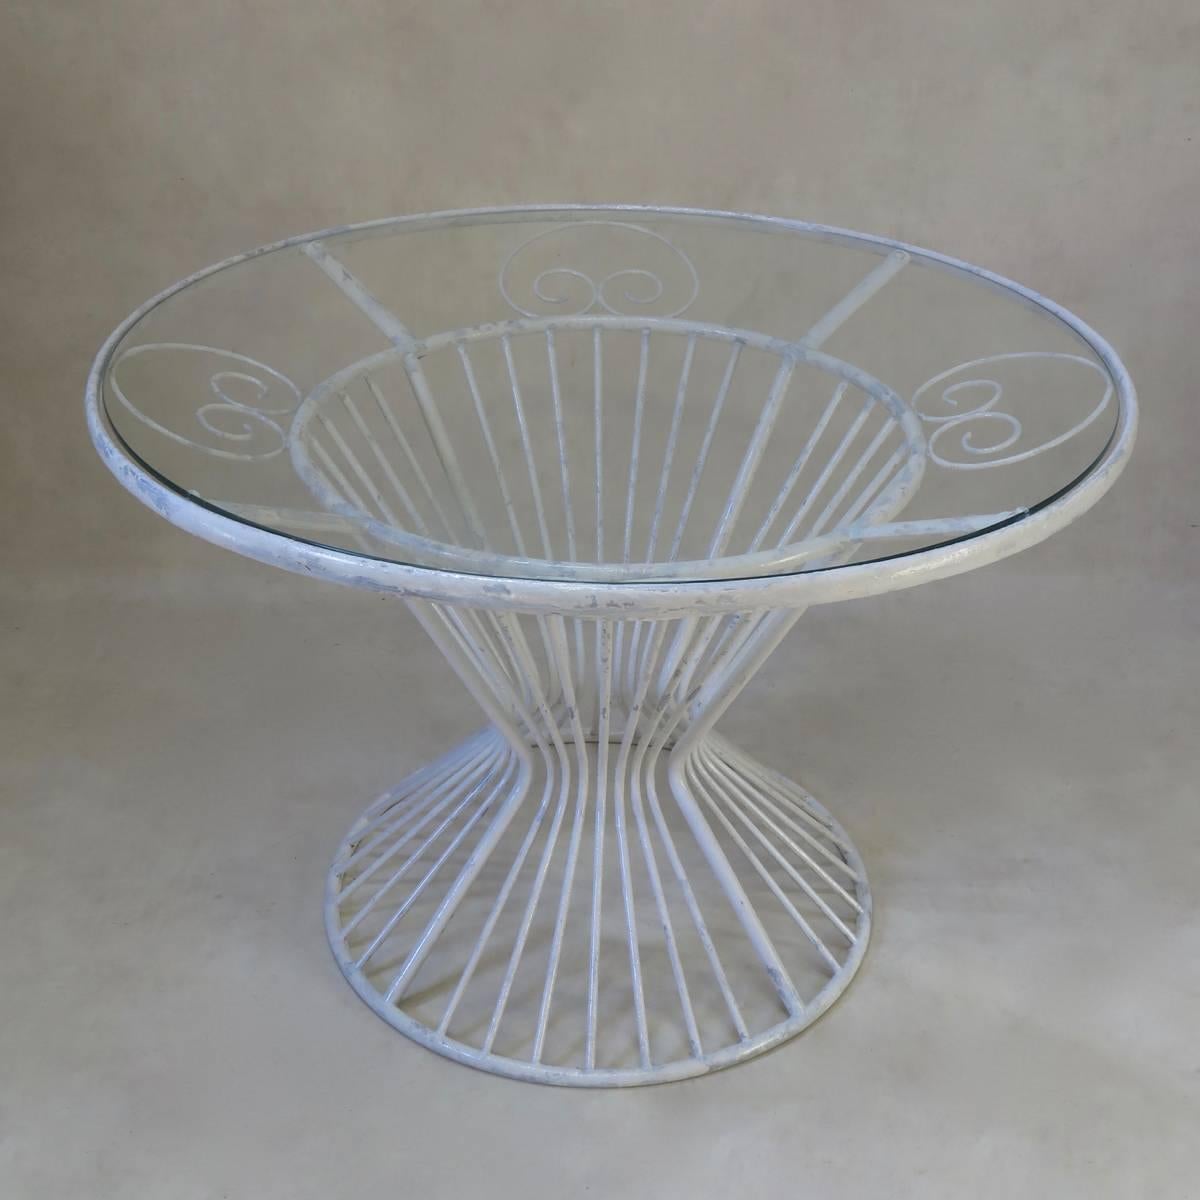 A French, circa midcentury round dining table of nice design, made of painted iron, and fitted with a safety glass top.